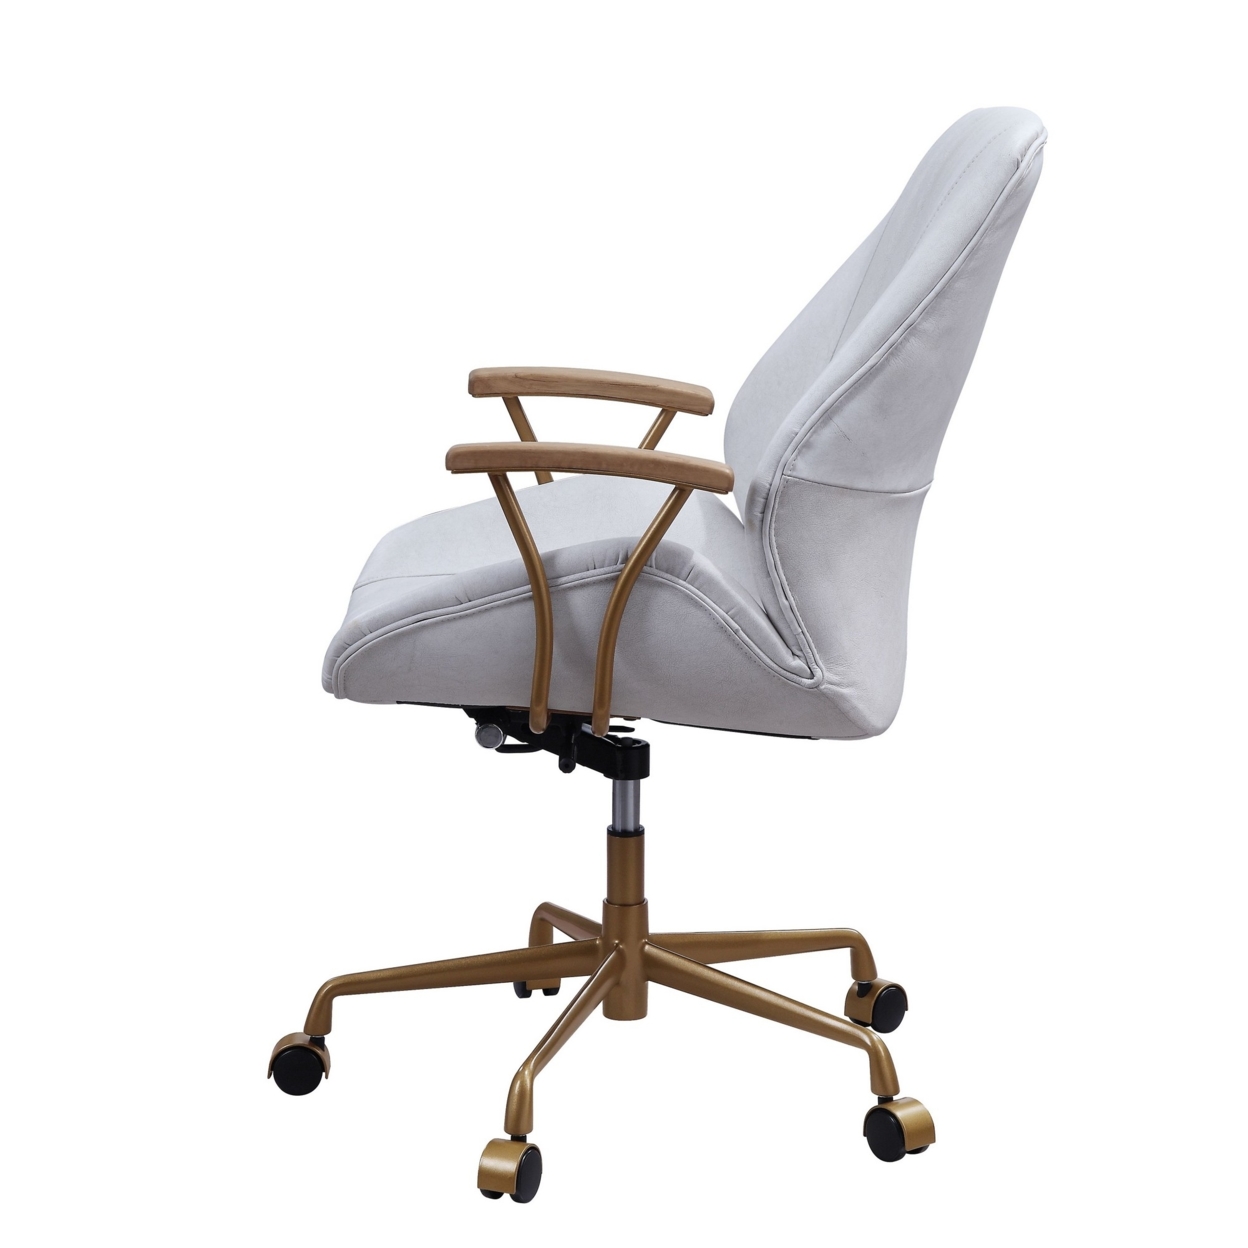 Office Chair With 5 Star Base And Armrests, Vintage White And Brown- Saltoro Sherpi